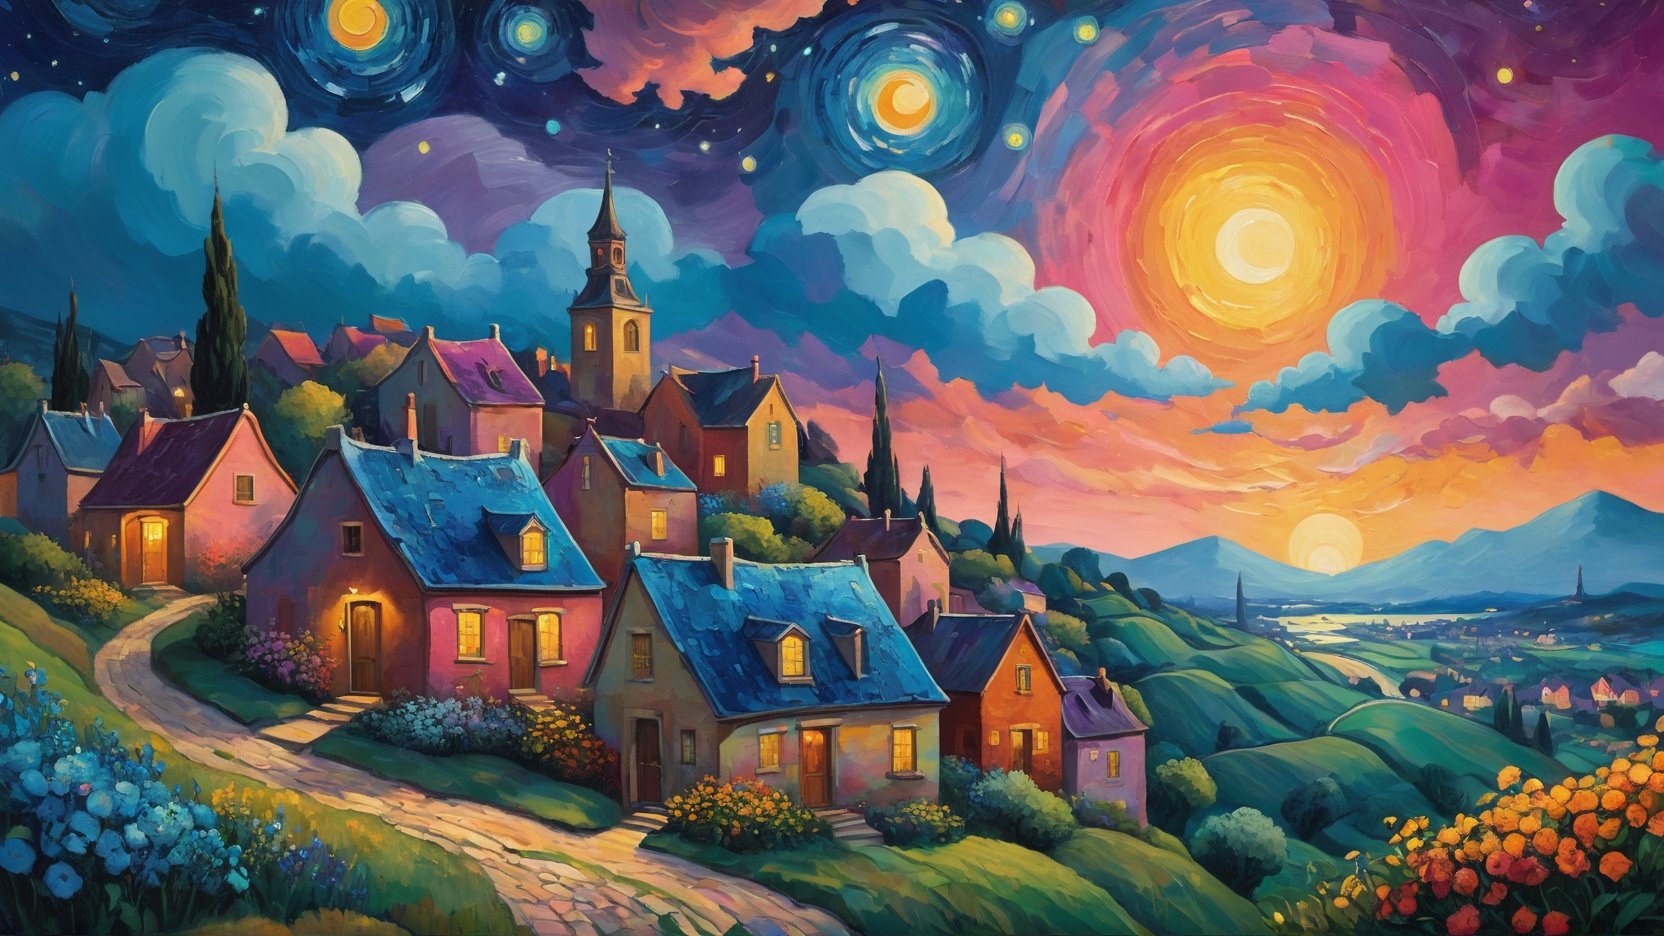 oil painting concept art, vibrant color, 

The starry night style, van gogh style, rough brush,

Colorful houses lining the old town surrounded by abundant flower. A peaceful night descends, with a beautiful sunset sky and colorful, storybook-like clouds, 

Create a whimsical and vibrant townscape with colorful, fantastical buildings, The color palette should include bright pinks, oranges, blues, and purples, with contrasting highlights and shadows to give depth, The brushwork should be smooth, with clean lines for the buildings and more fluid strokes for the sky and water reflections, The overall art style should evoke elements of surrealism mixed with folk art, Draw inspiration from artists like Marc Chagall for dreamlike scenes and Joan Miró for bold colors and shapes,

a image for a póster of psytrance festival, contains fractals, spiritual composition, the imagen evoke happiness and energy. the imagen contains organic textures and surreal composition. some parts of the image evoke a las trip